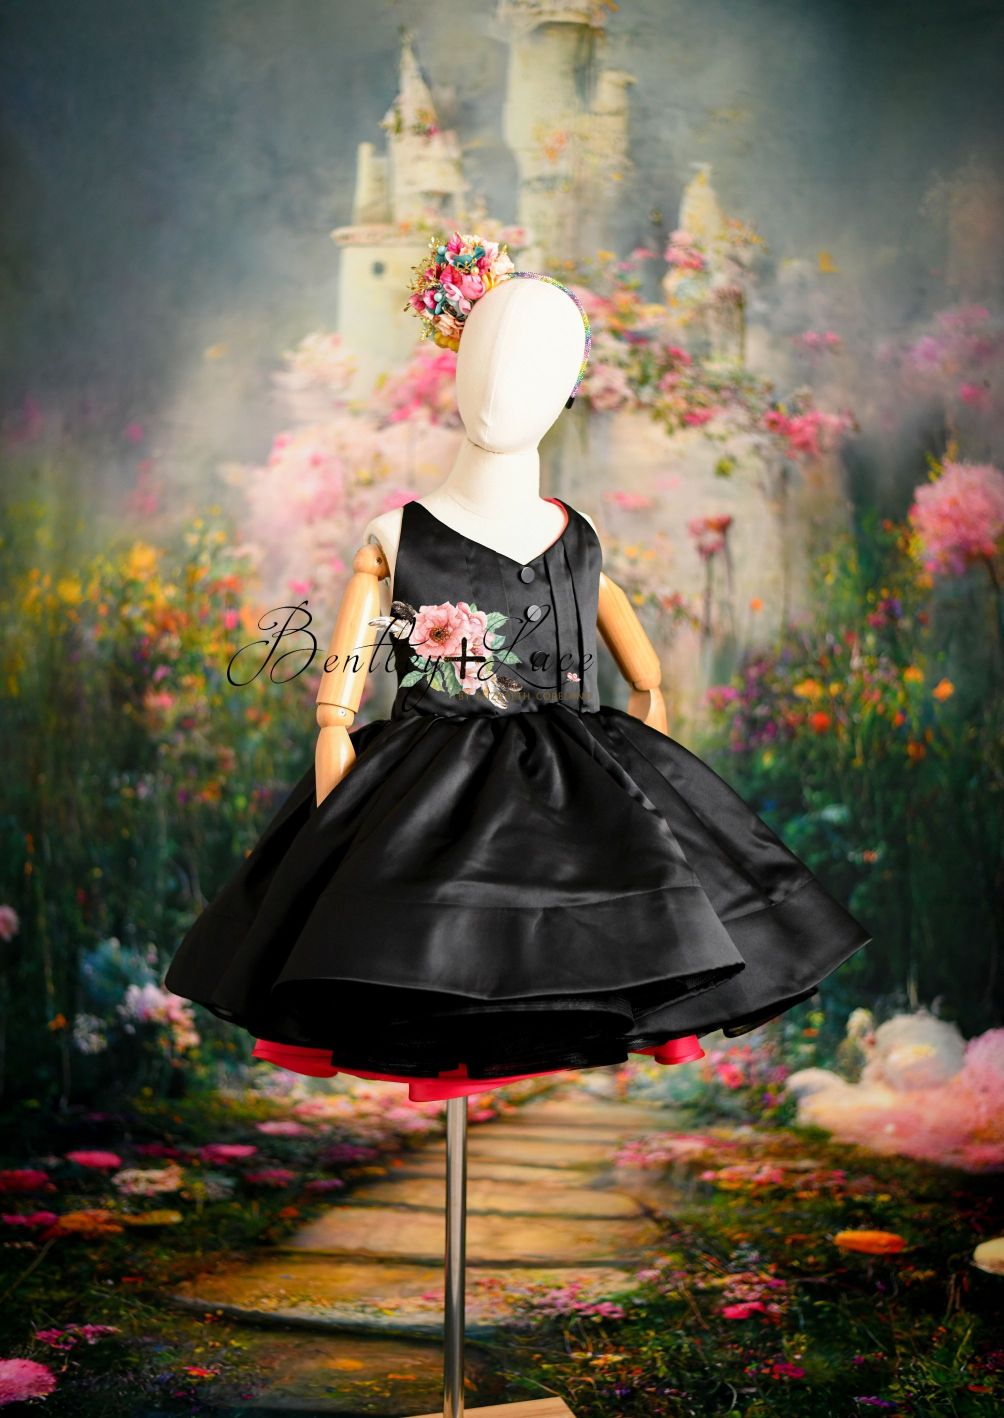 Reversible "Dolly" Pink/black  Petal  Length Dress - Editorial Dress, Couture Gown, Special Occasion Dress